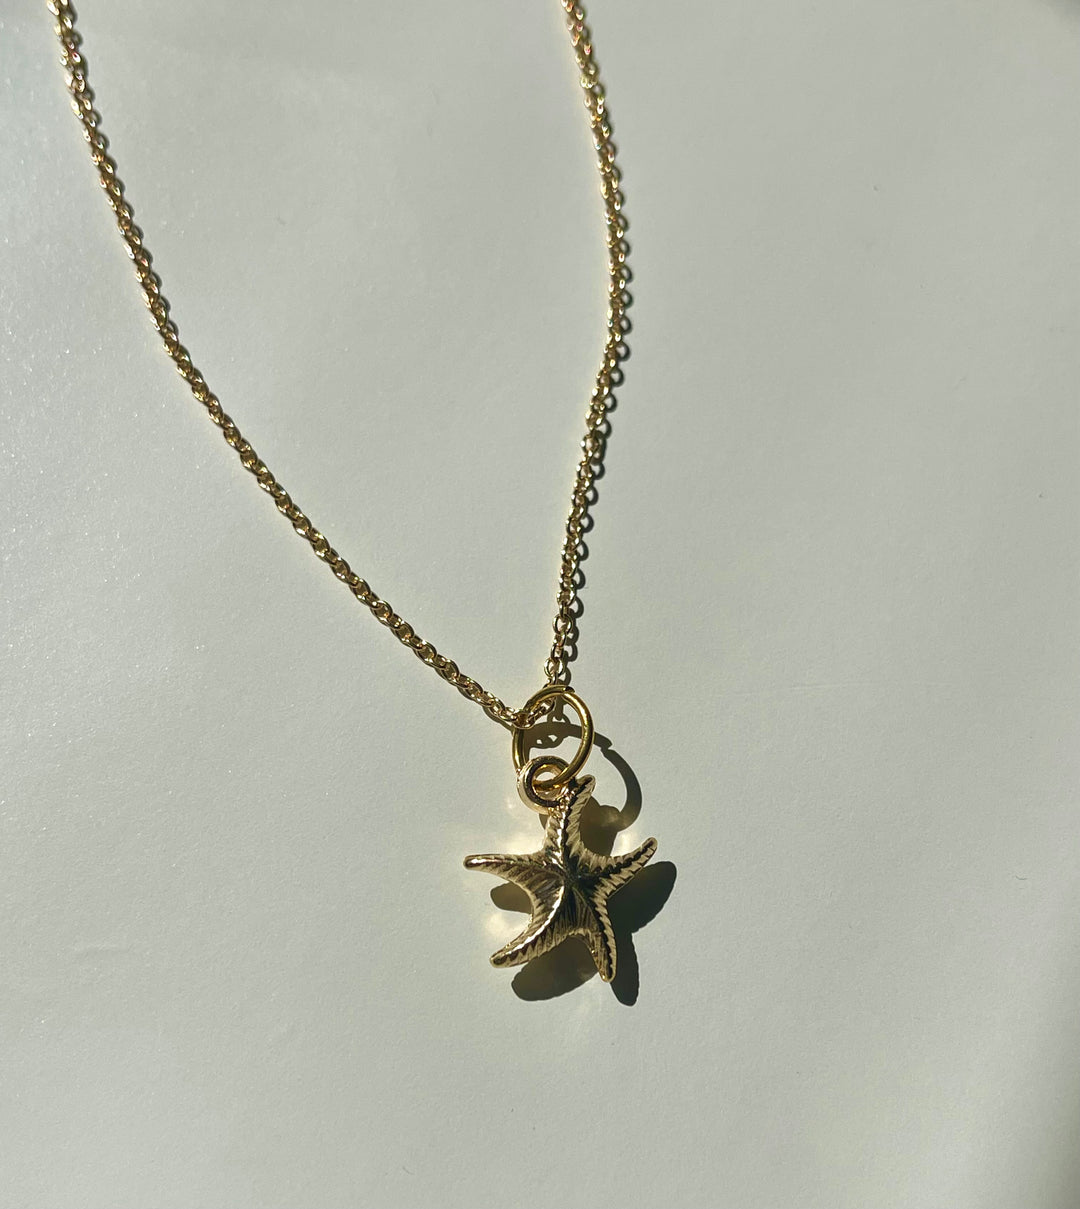 The Starfish necklace